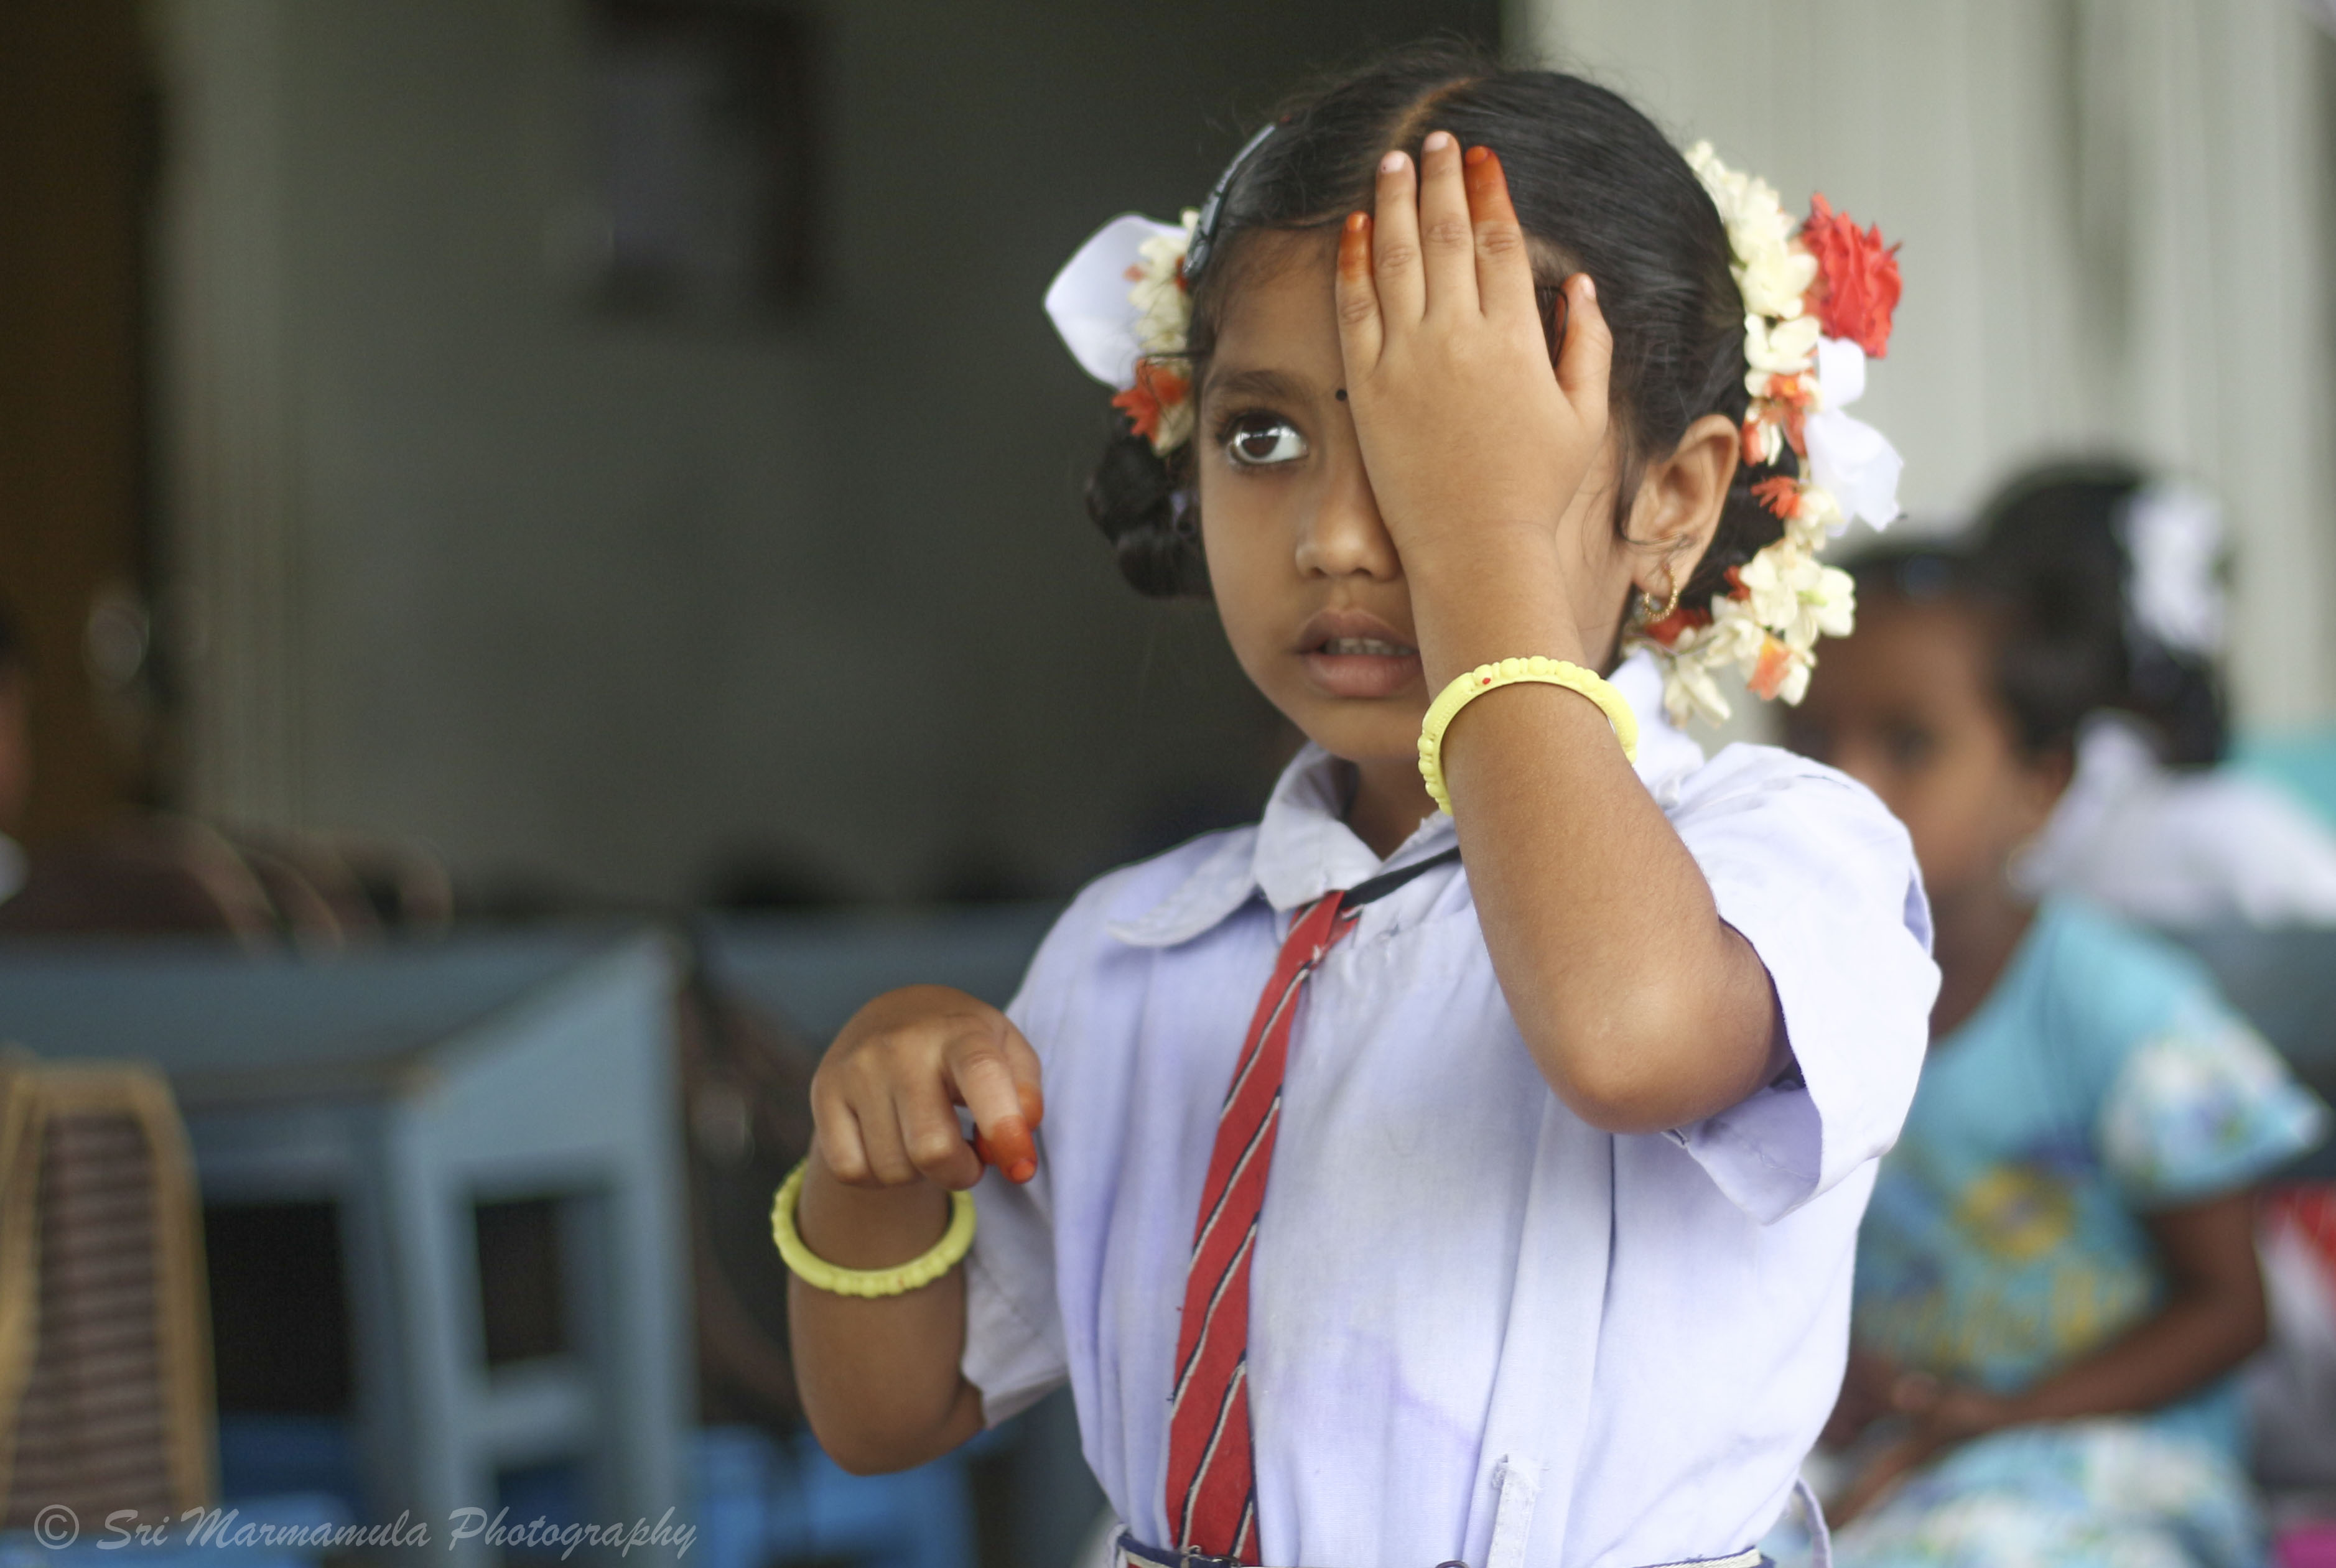 A little girl being screened at her school. INDIA. (c) SRI MARMAMULA/ LVPEI